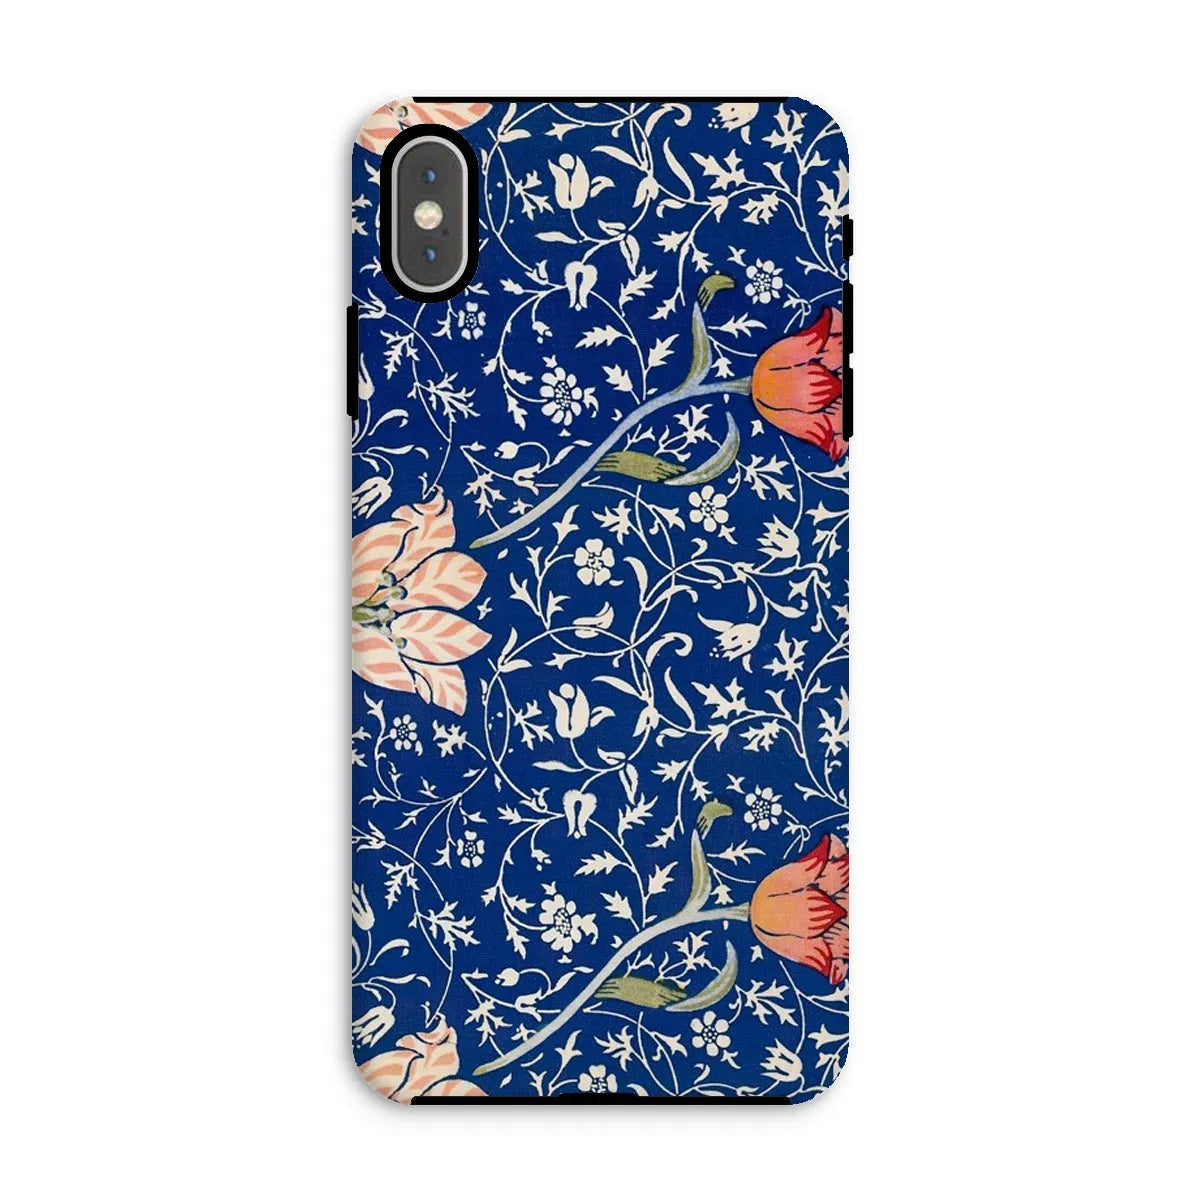 Medway - Floral Aesthetic Art Phone Case - William Morris - Iphone Xs Max / Matte - Mobile Phone Cases - Aesthetic Art